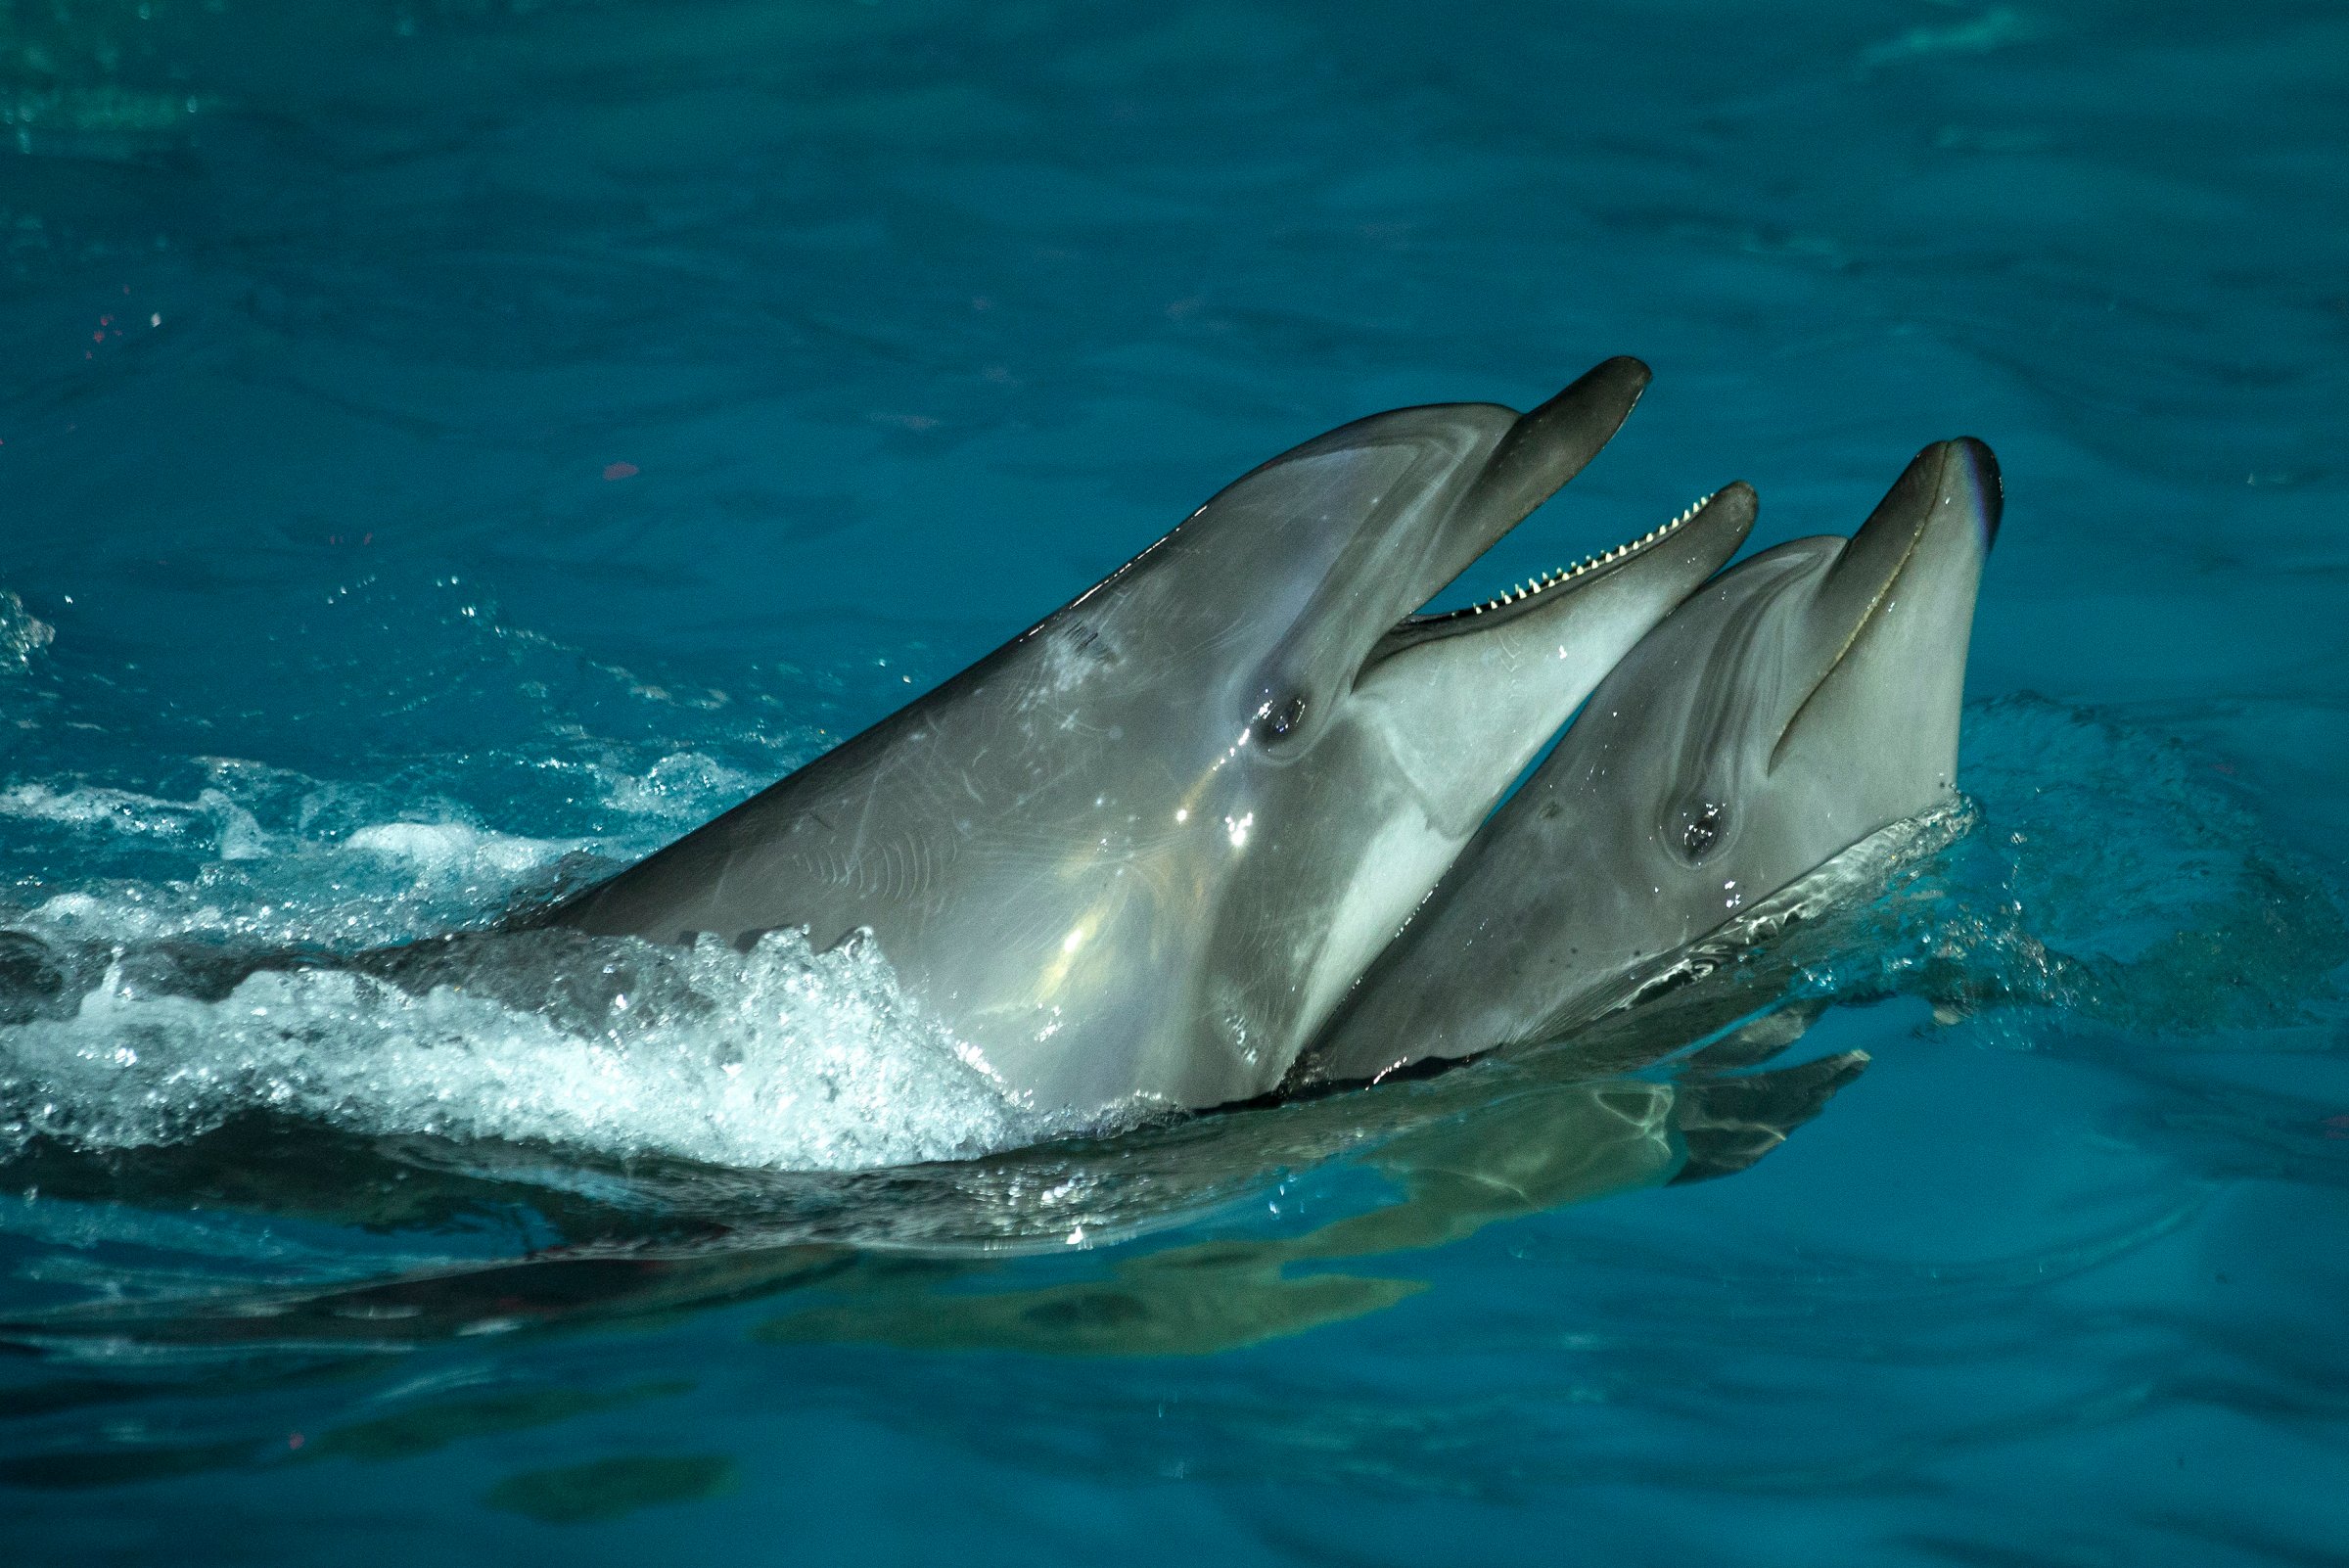 Dolphins in Minsk, Russia, March 8, 2015